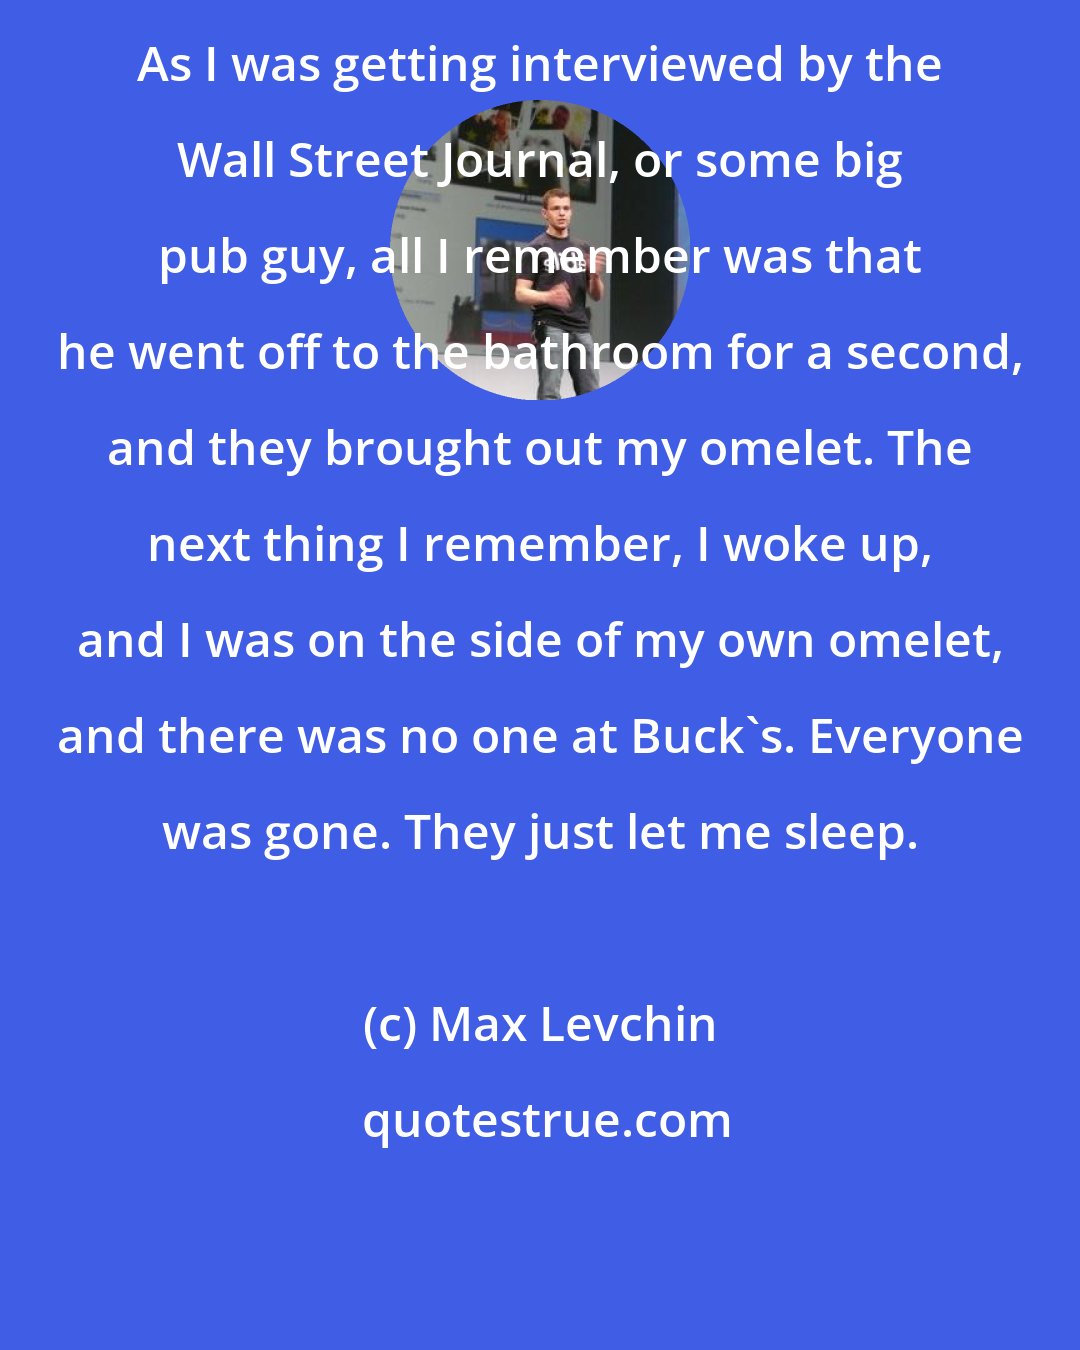 Max Levchin: As I was getting interviewed by the Wall Street Journal, or some big pub guy, all I remember was that he went off to the bathroom for a second, and they brought out my omelet. The next thing I remember, I woke up, and I was on the side of my own omelet, and there was no one at Buck's. Everyone was gone. They just let me sleep.